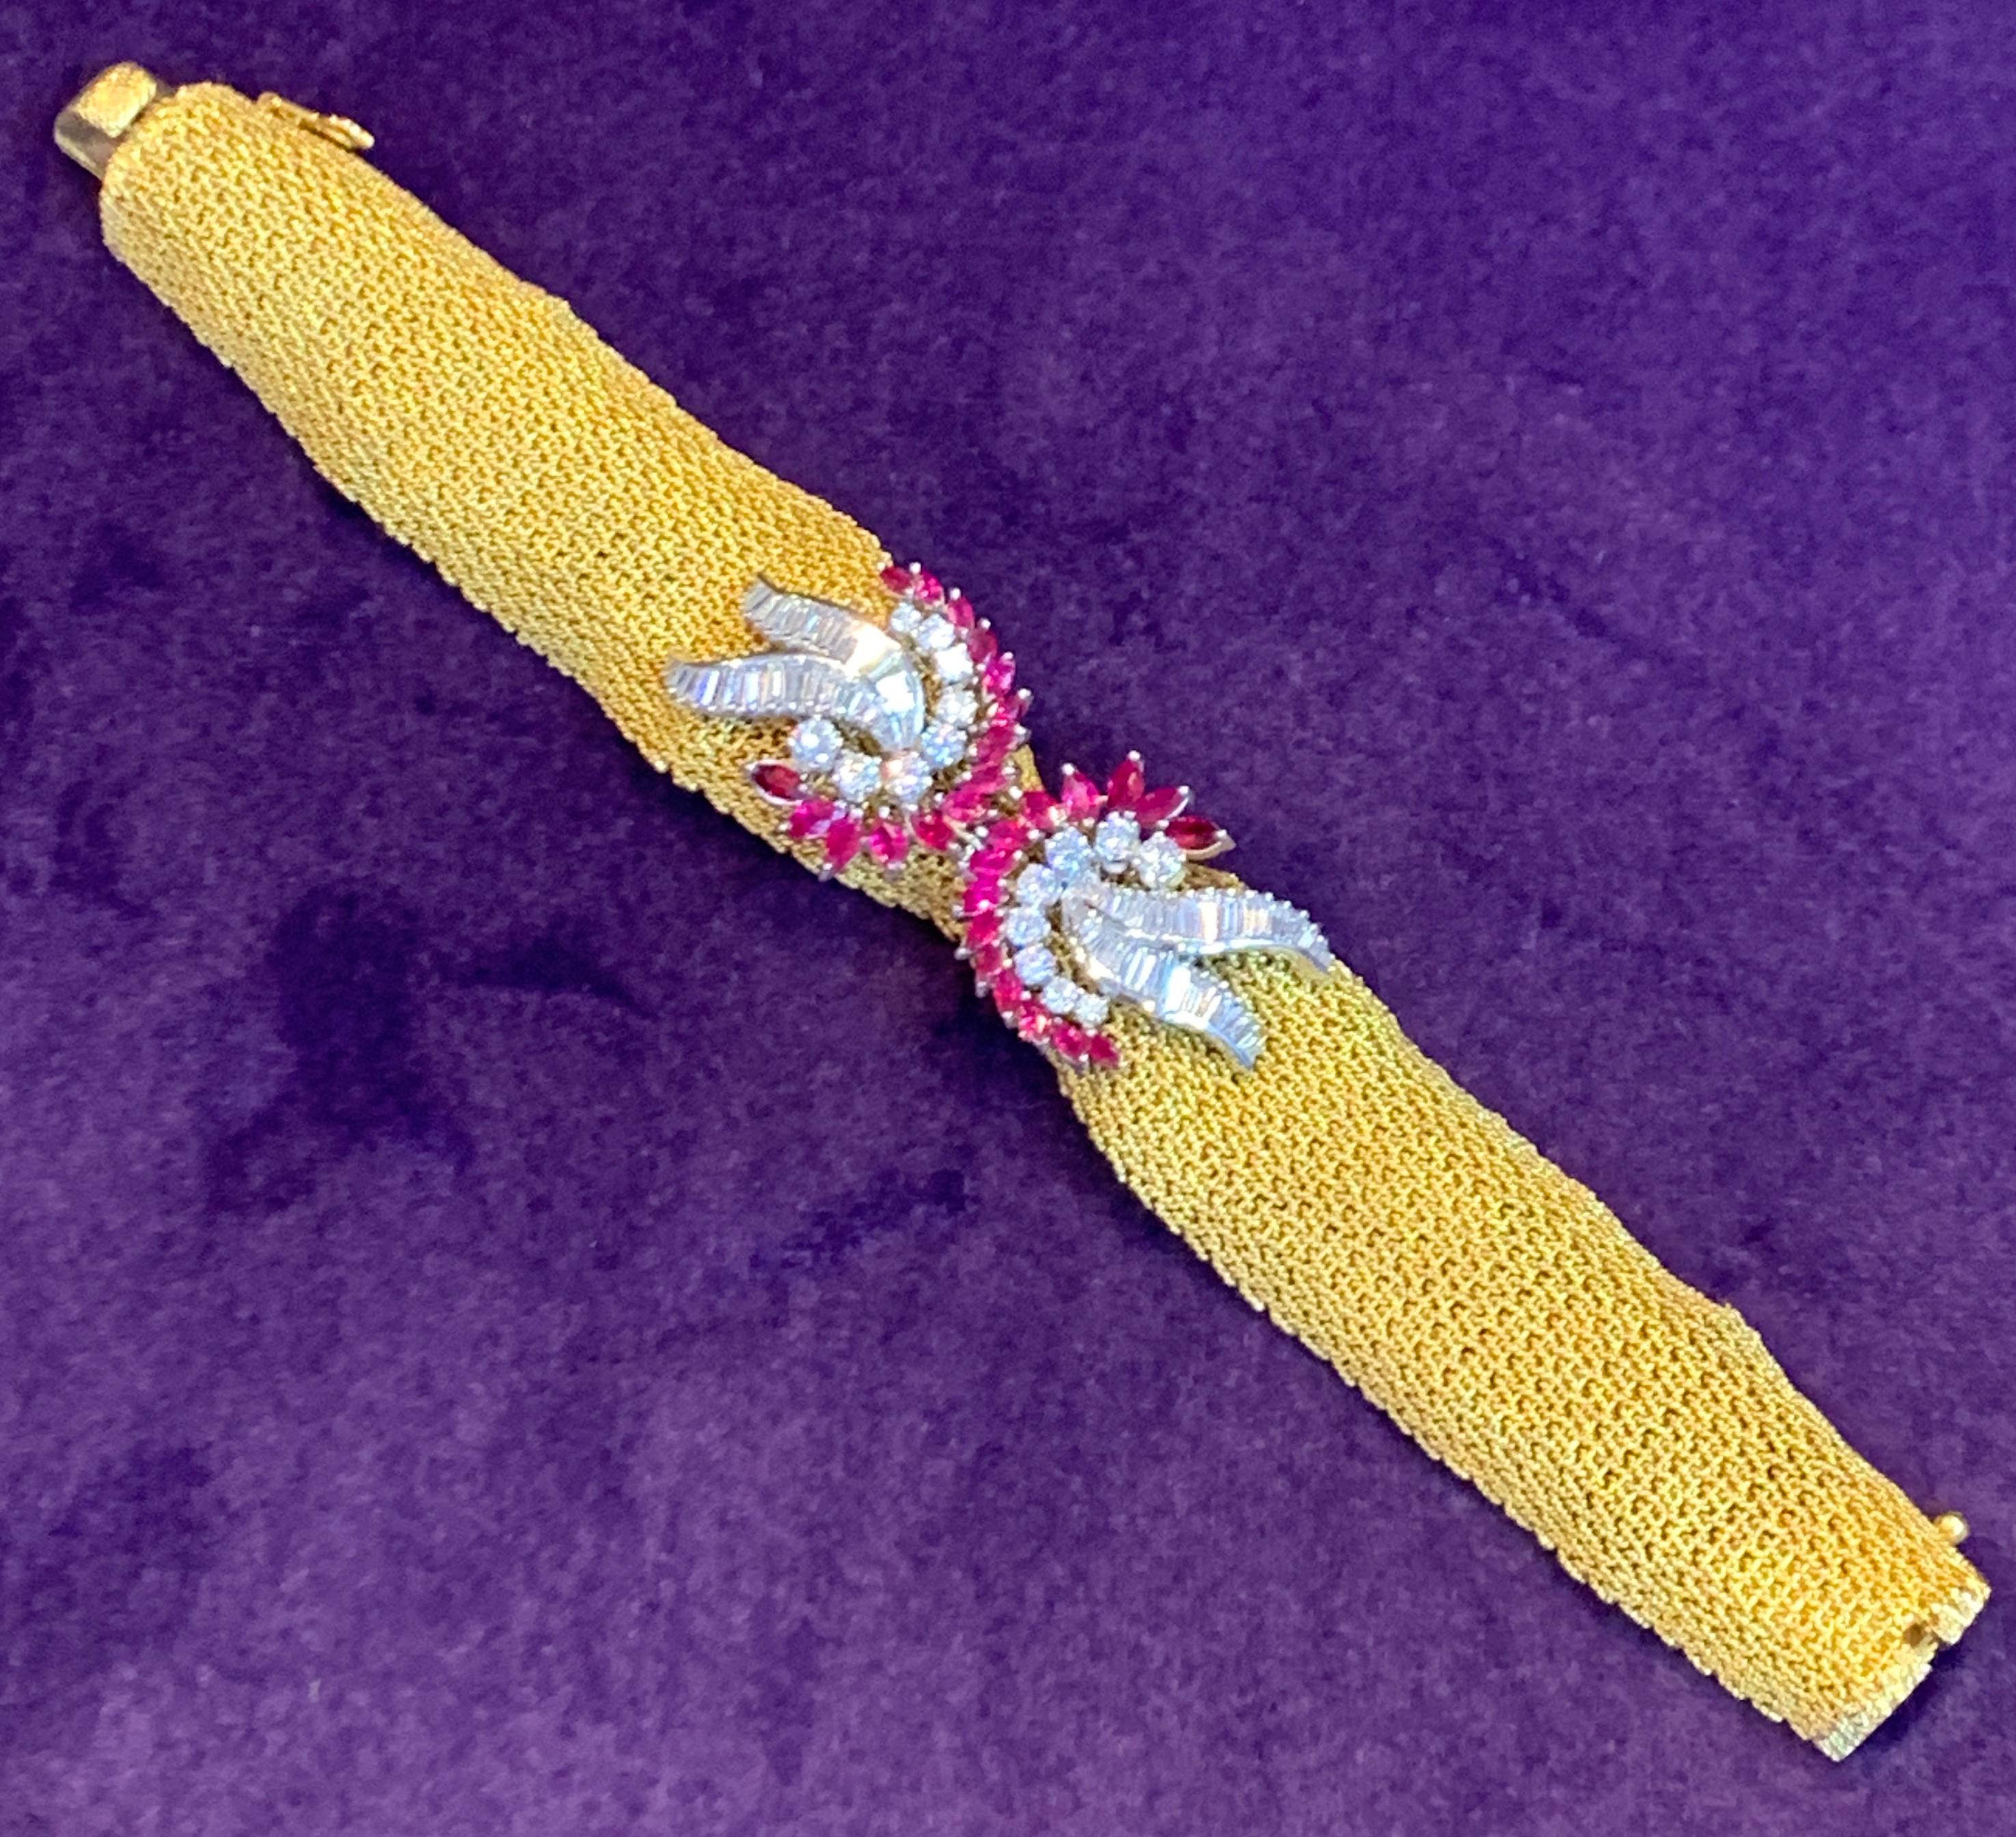 Ruby & Diamond Gold Thick Mesh Bracelet,made circa 1940 Retro
28 Marquise shape rubies with baguette & round cut diamonds
18K Yellow Gold 
Bracelet Length: 7.5 inches
84.2 Grams